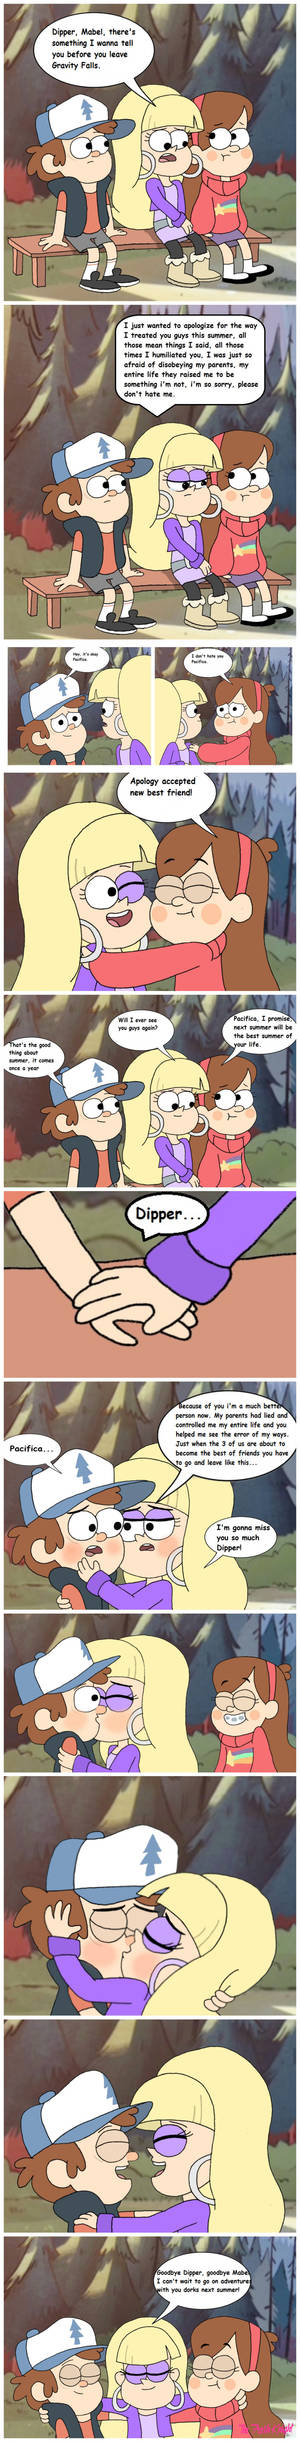 Mabel And Dipper Porn Comic - End Of Summer by The-Fresh-Knight.deviantart.com on @DeviantArt